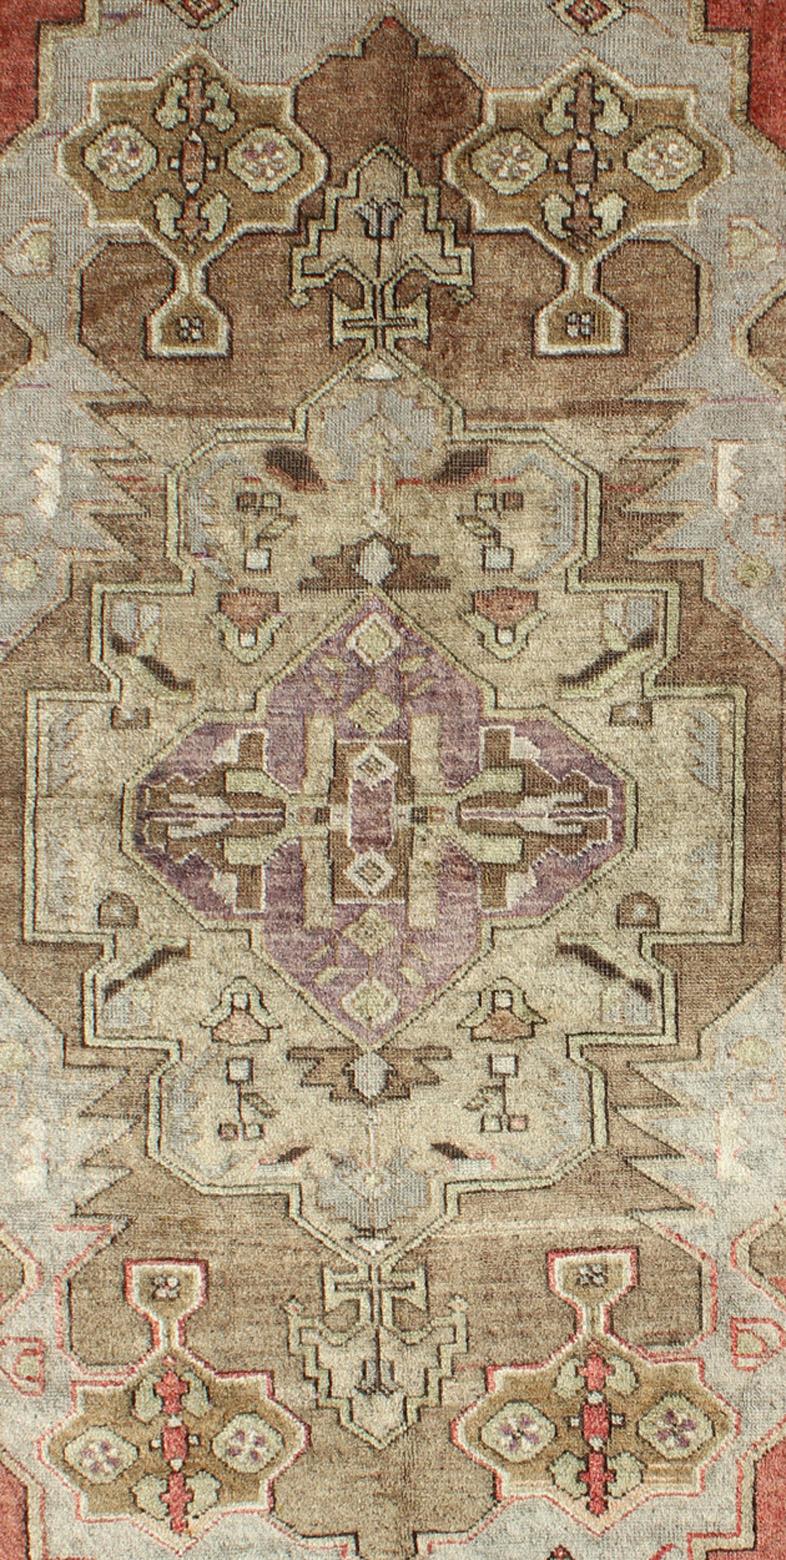 Measures 3'9 x 7'6

This vintage Turkish Oushak carpet, circa mid-20th century features a central, multi-layered medallion design, as well as patterns of smaller tribal and Sub-geometric elements in the four cornices, and in the surrounding borders.